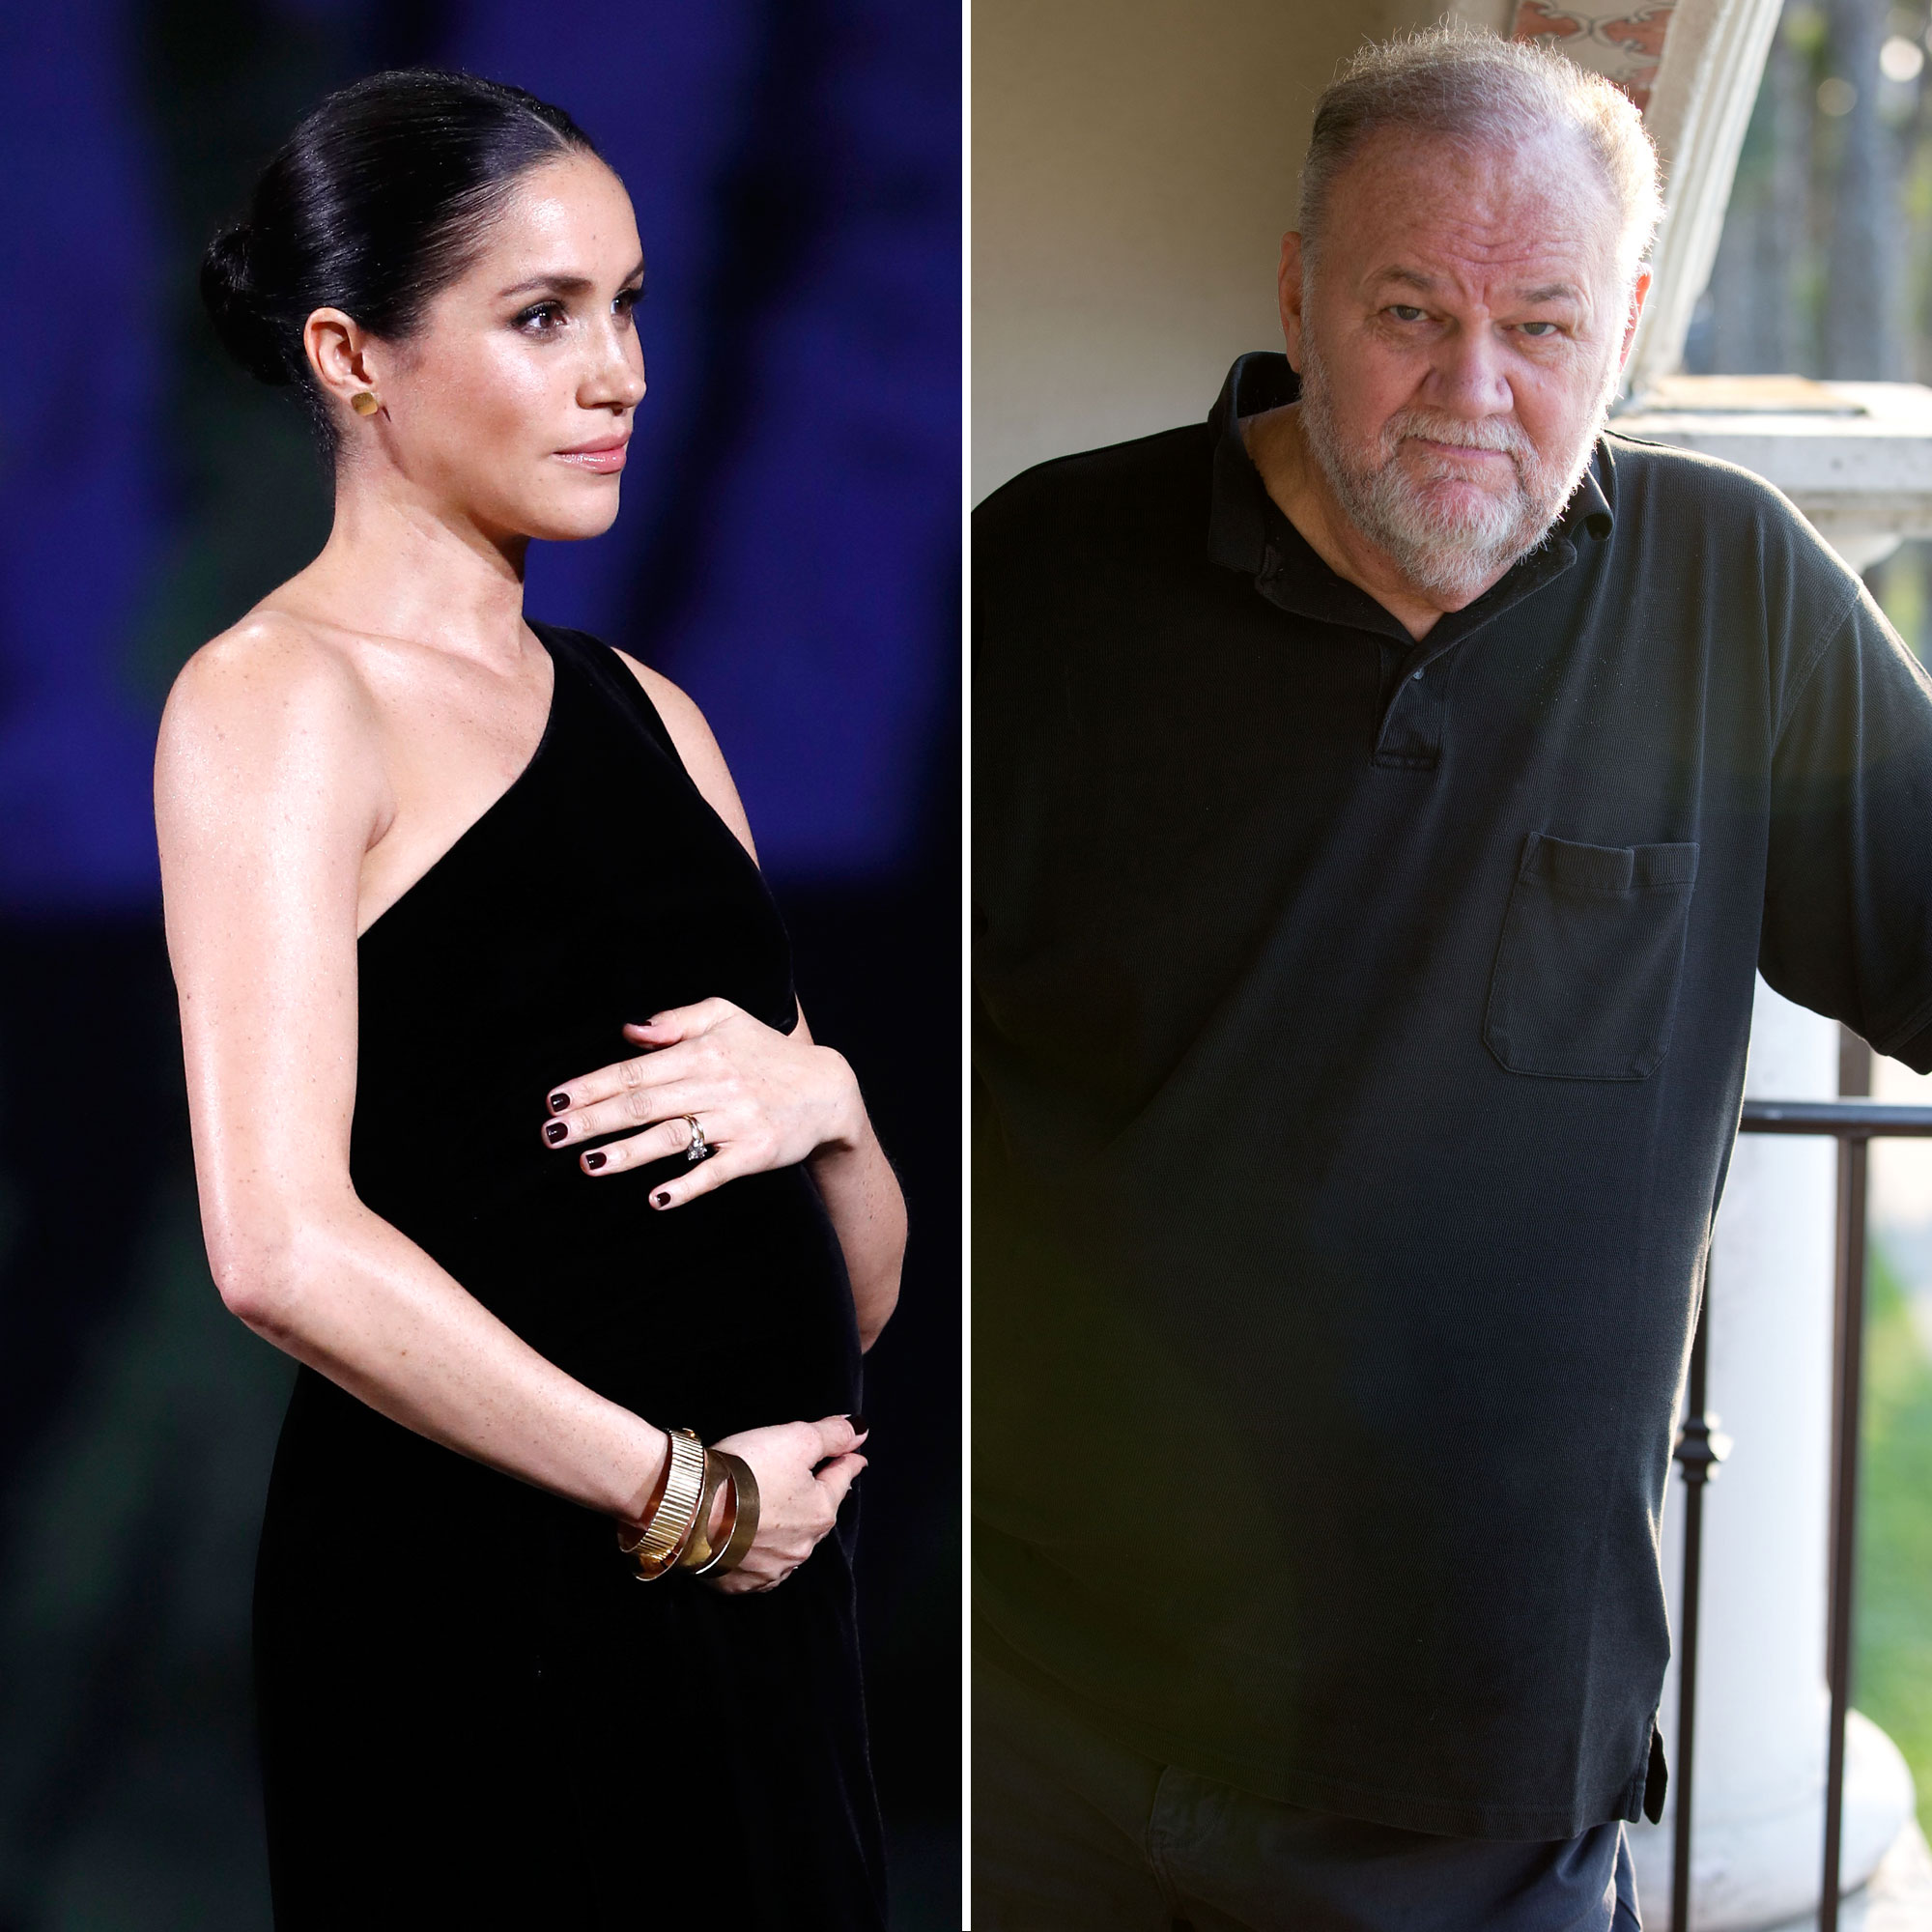 Meghan, Duchess of Sussex and her Father Thomas Markle